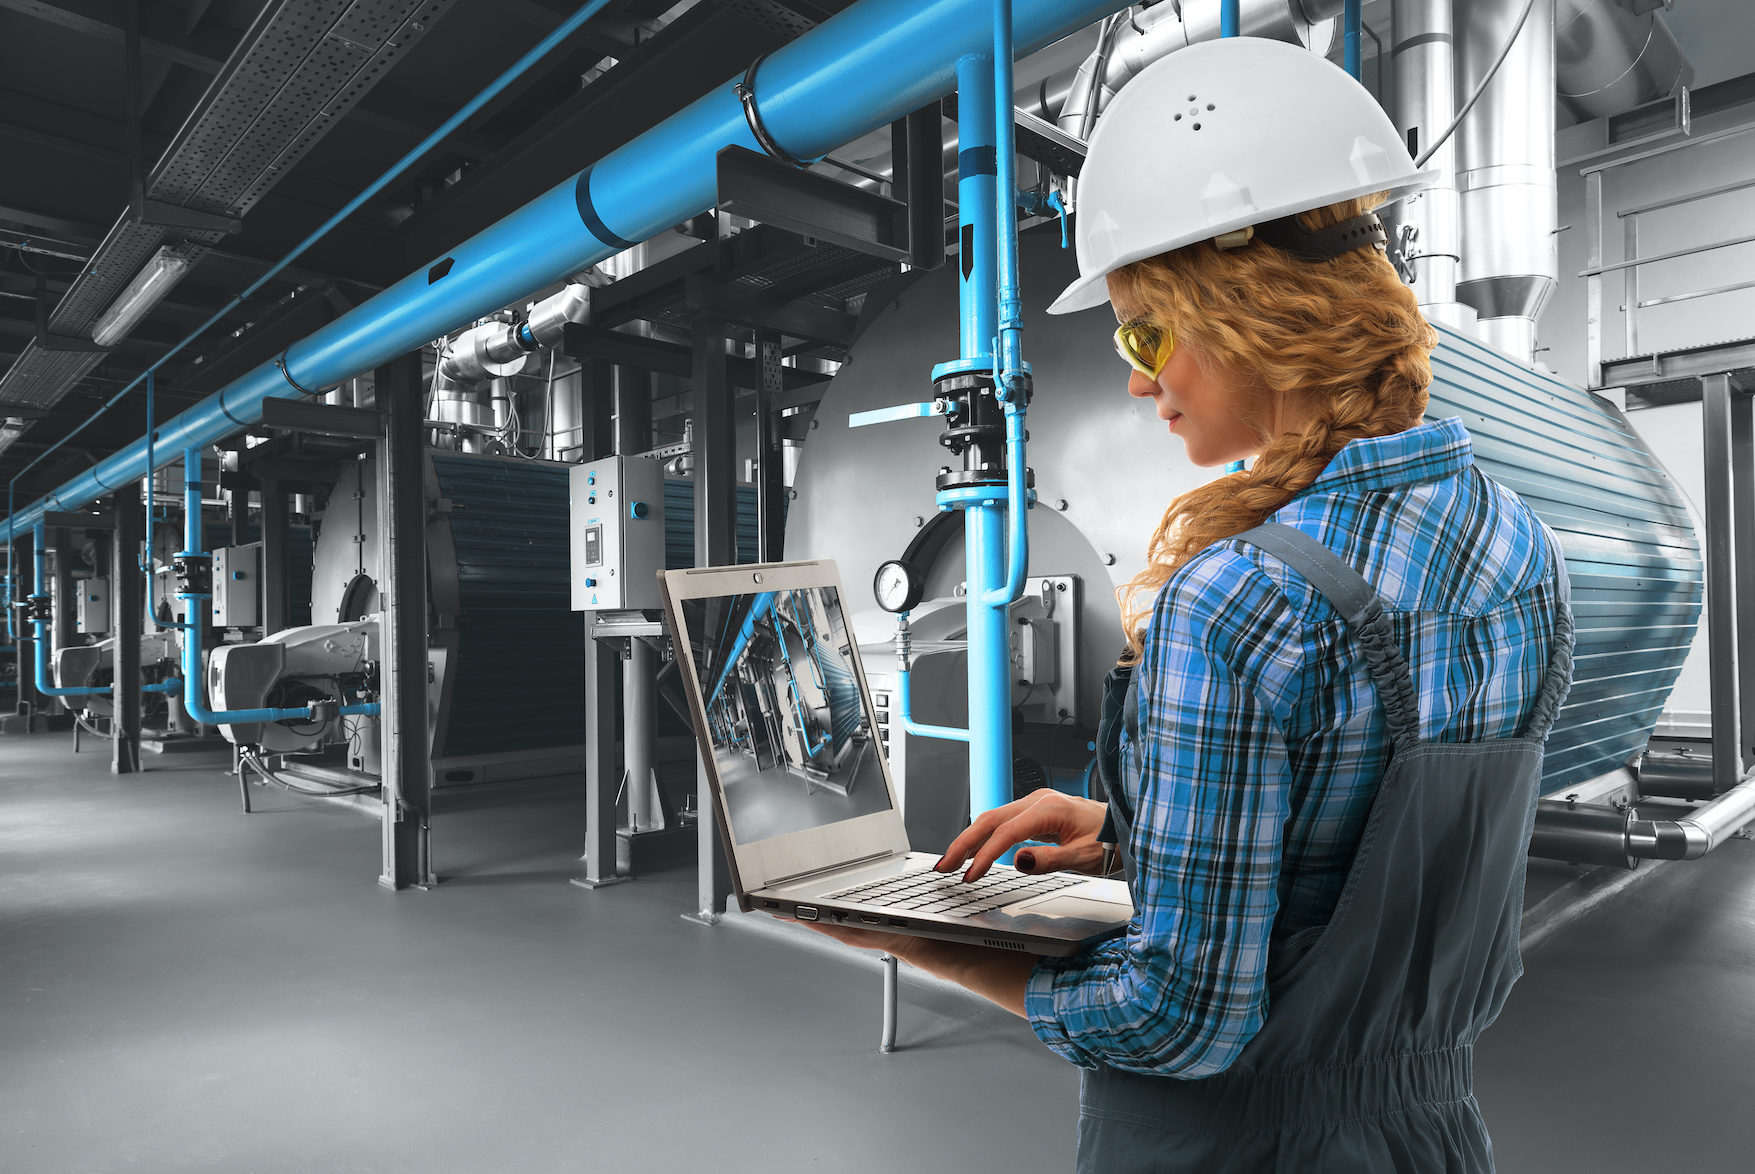 Engineer woman with laptop inspect modern industrial gas boiler room. Heating gas boilers, pipelines, valves. Mixed media